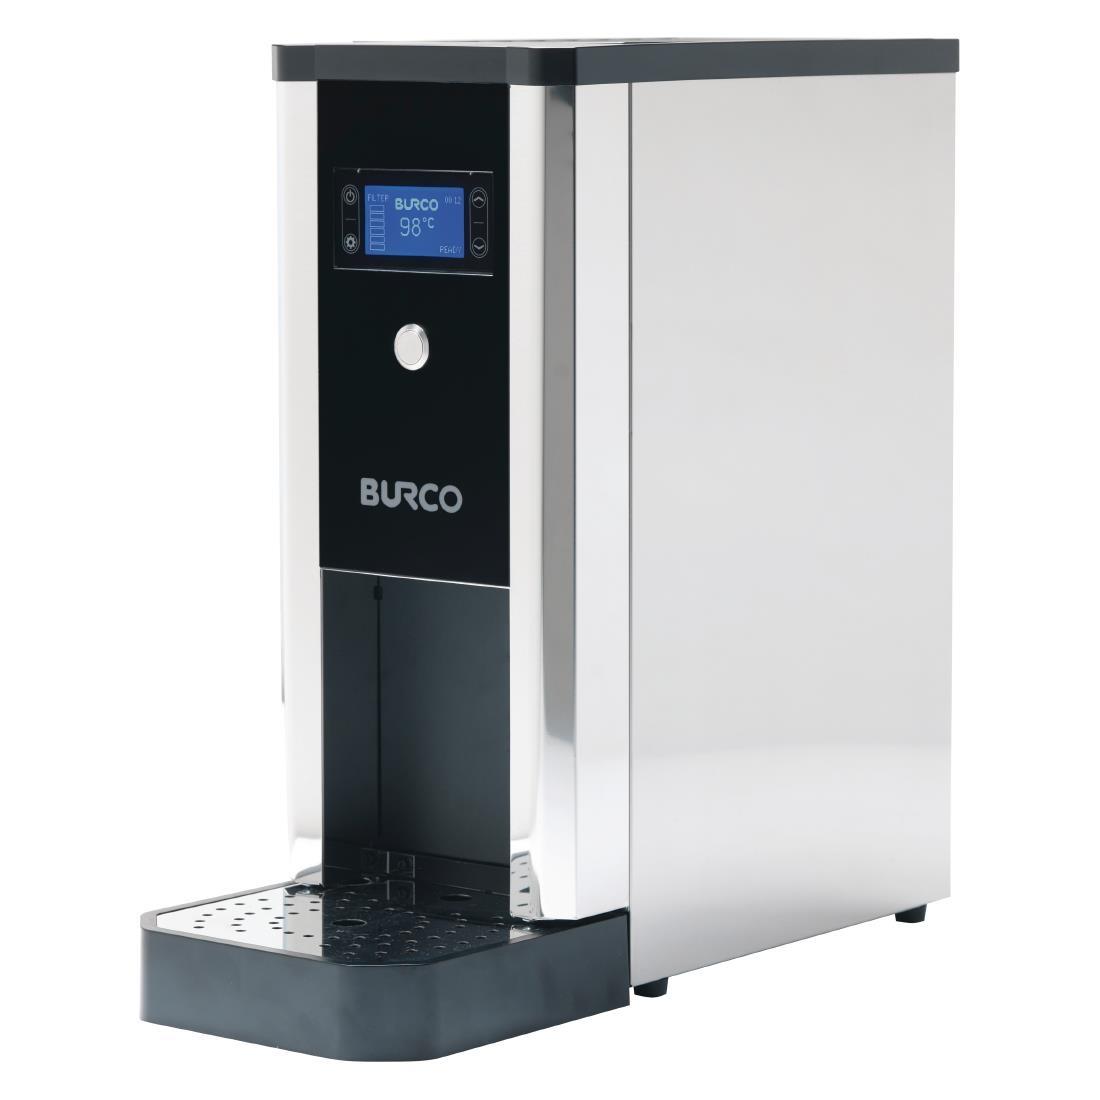 Burco Slimline 5Ltr Auto Fill Water Boiler with Filtration 70043 - DY436  - 1